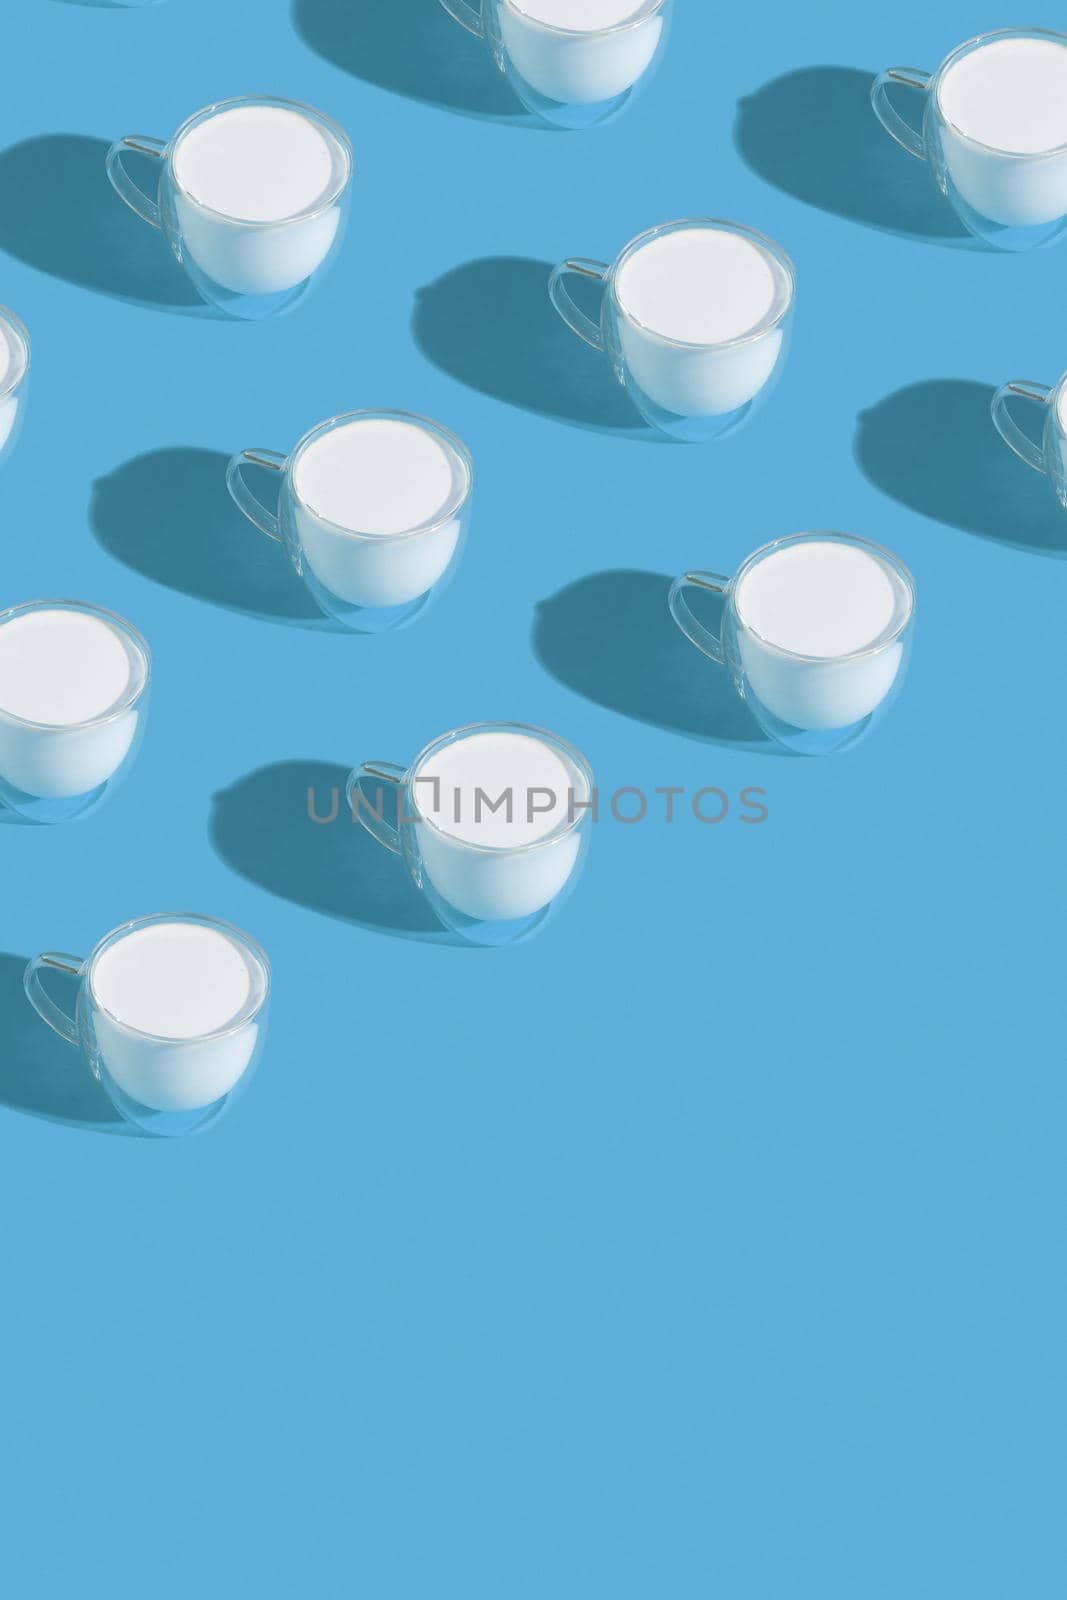 Milk in a glass pattern on a colored background, dairy diet concept. High quality photo